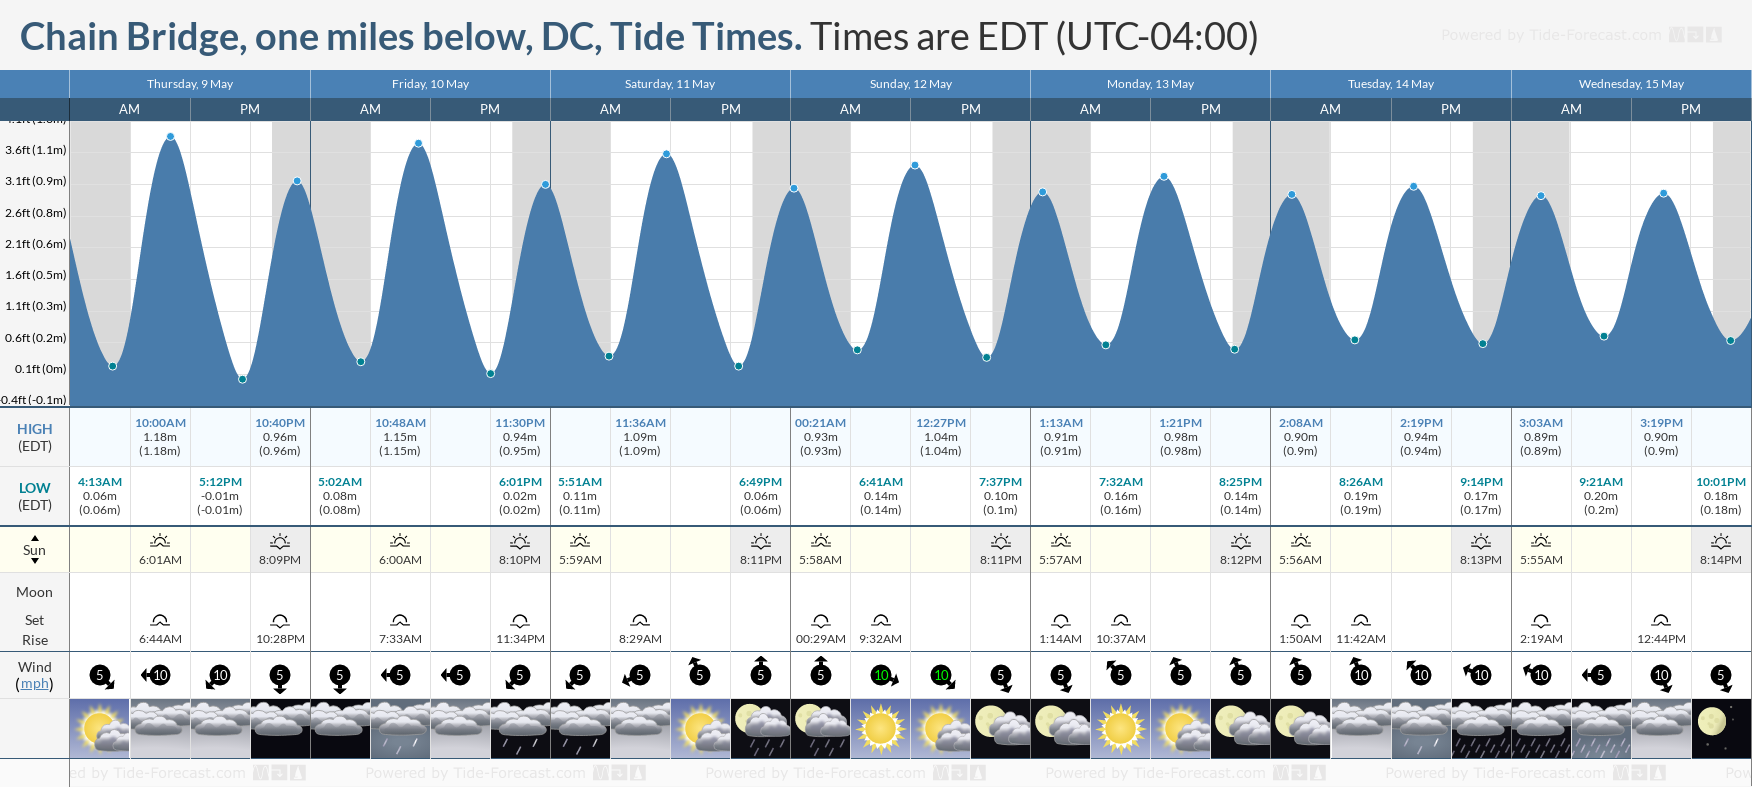 Chain Bridge, one miles below, DC Tide Chart including high and low tide tide times for the next 7 days